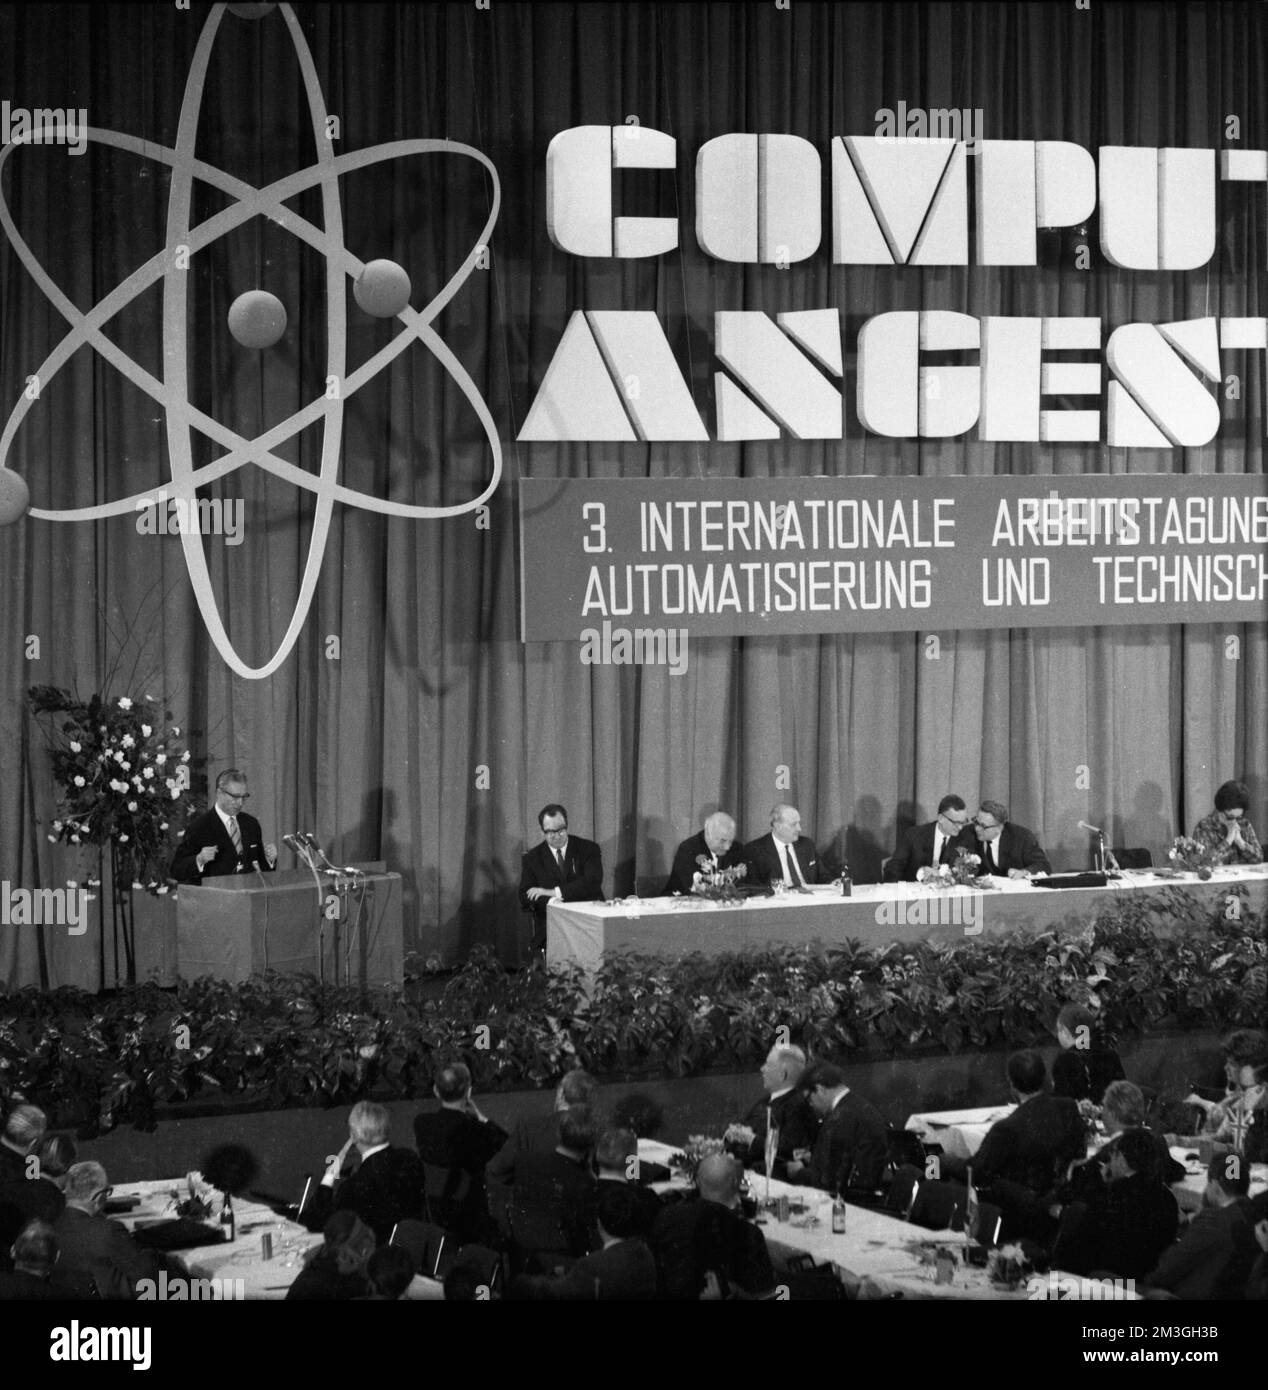 The influence of the computer on society, the world of work and the future was the theme of this international conference organised by IG Metall in Stock Photo